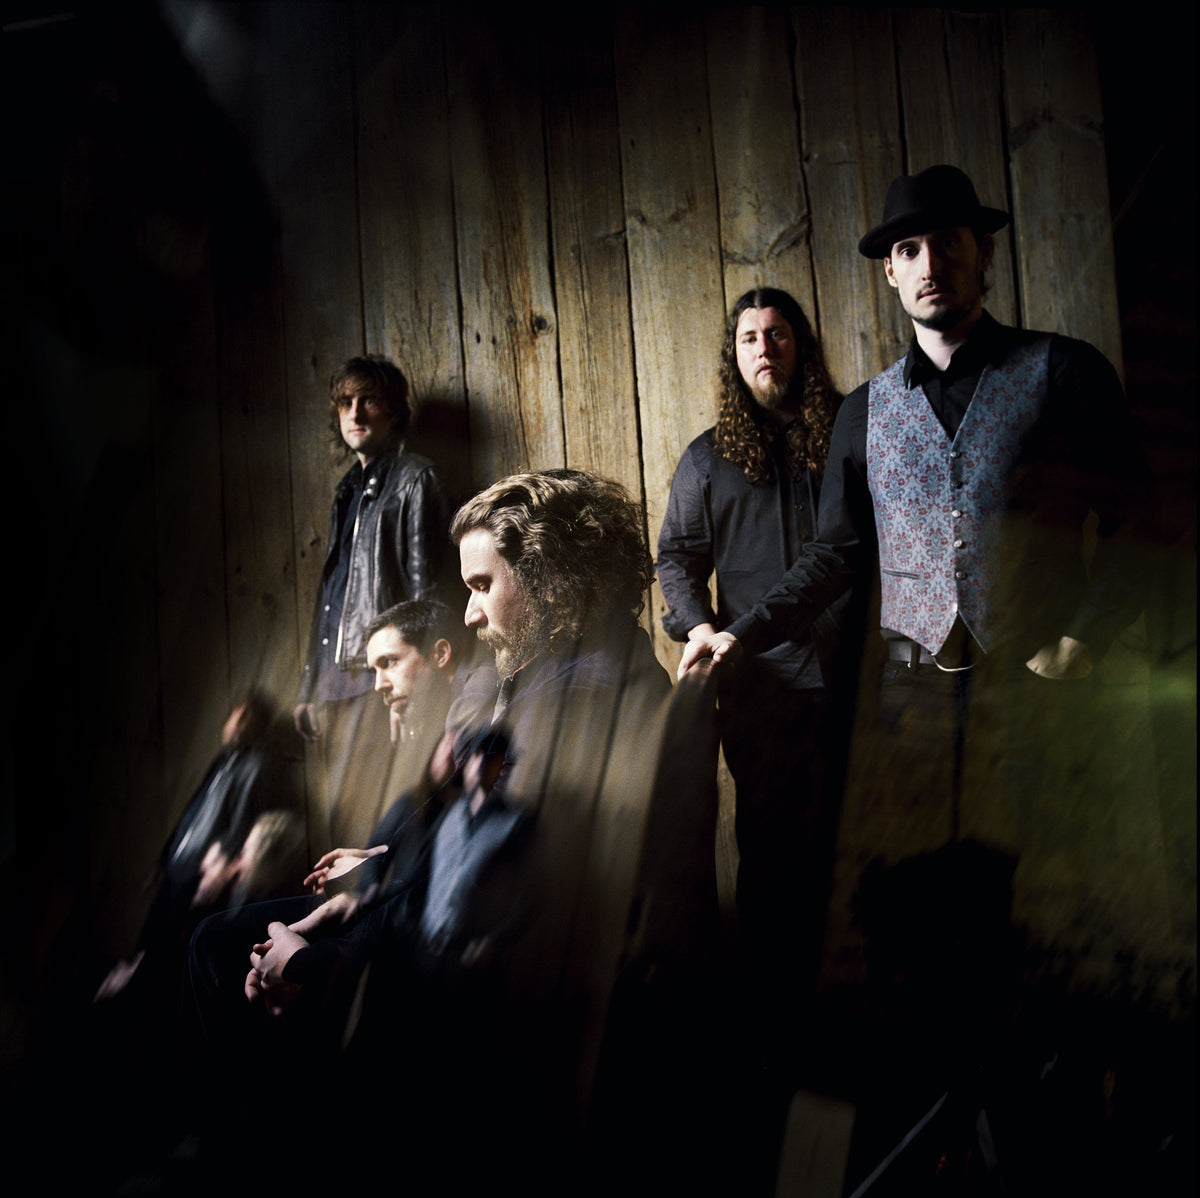 Life, Death, Learning to Survive, and My Morning Jacket's Z